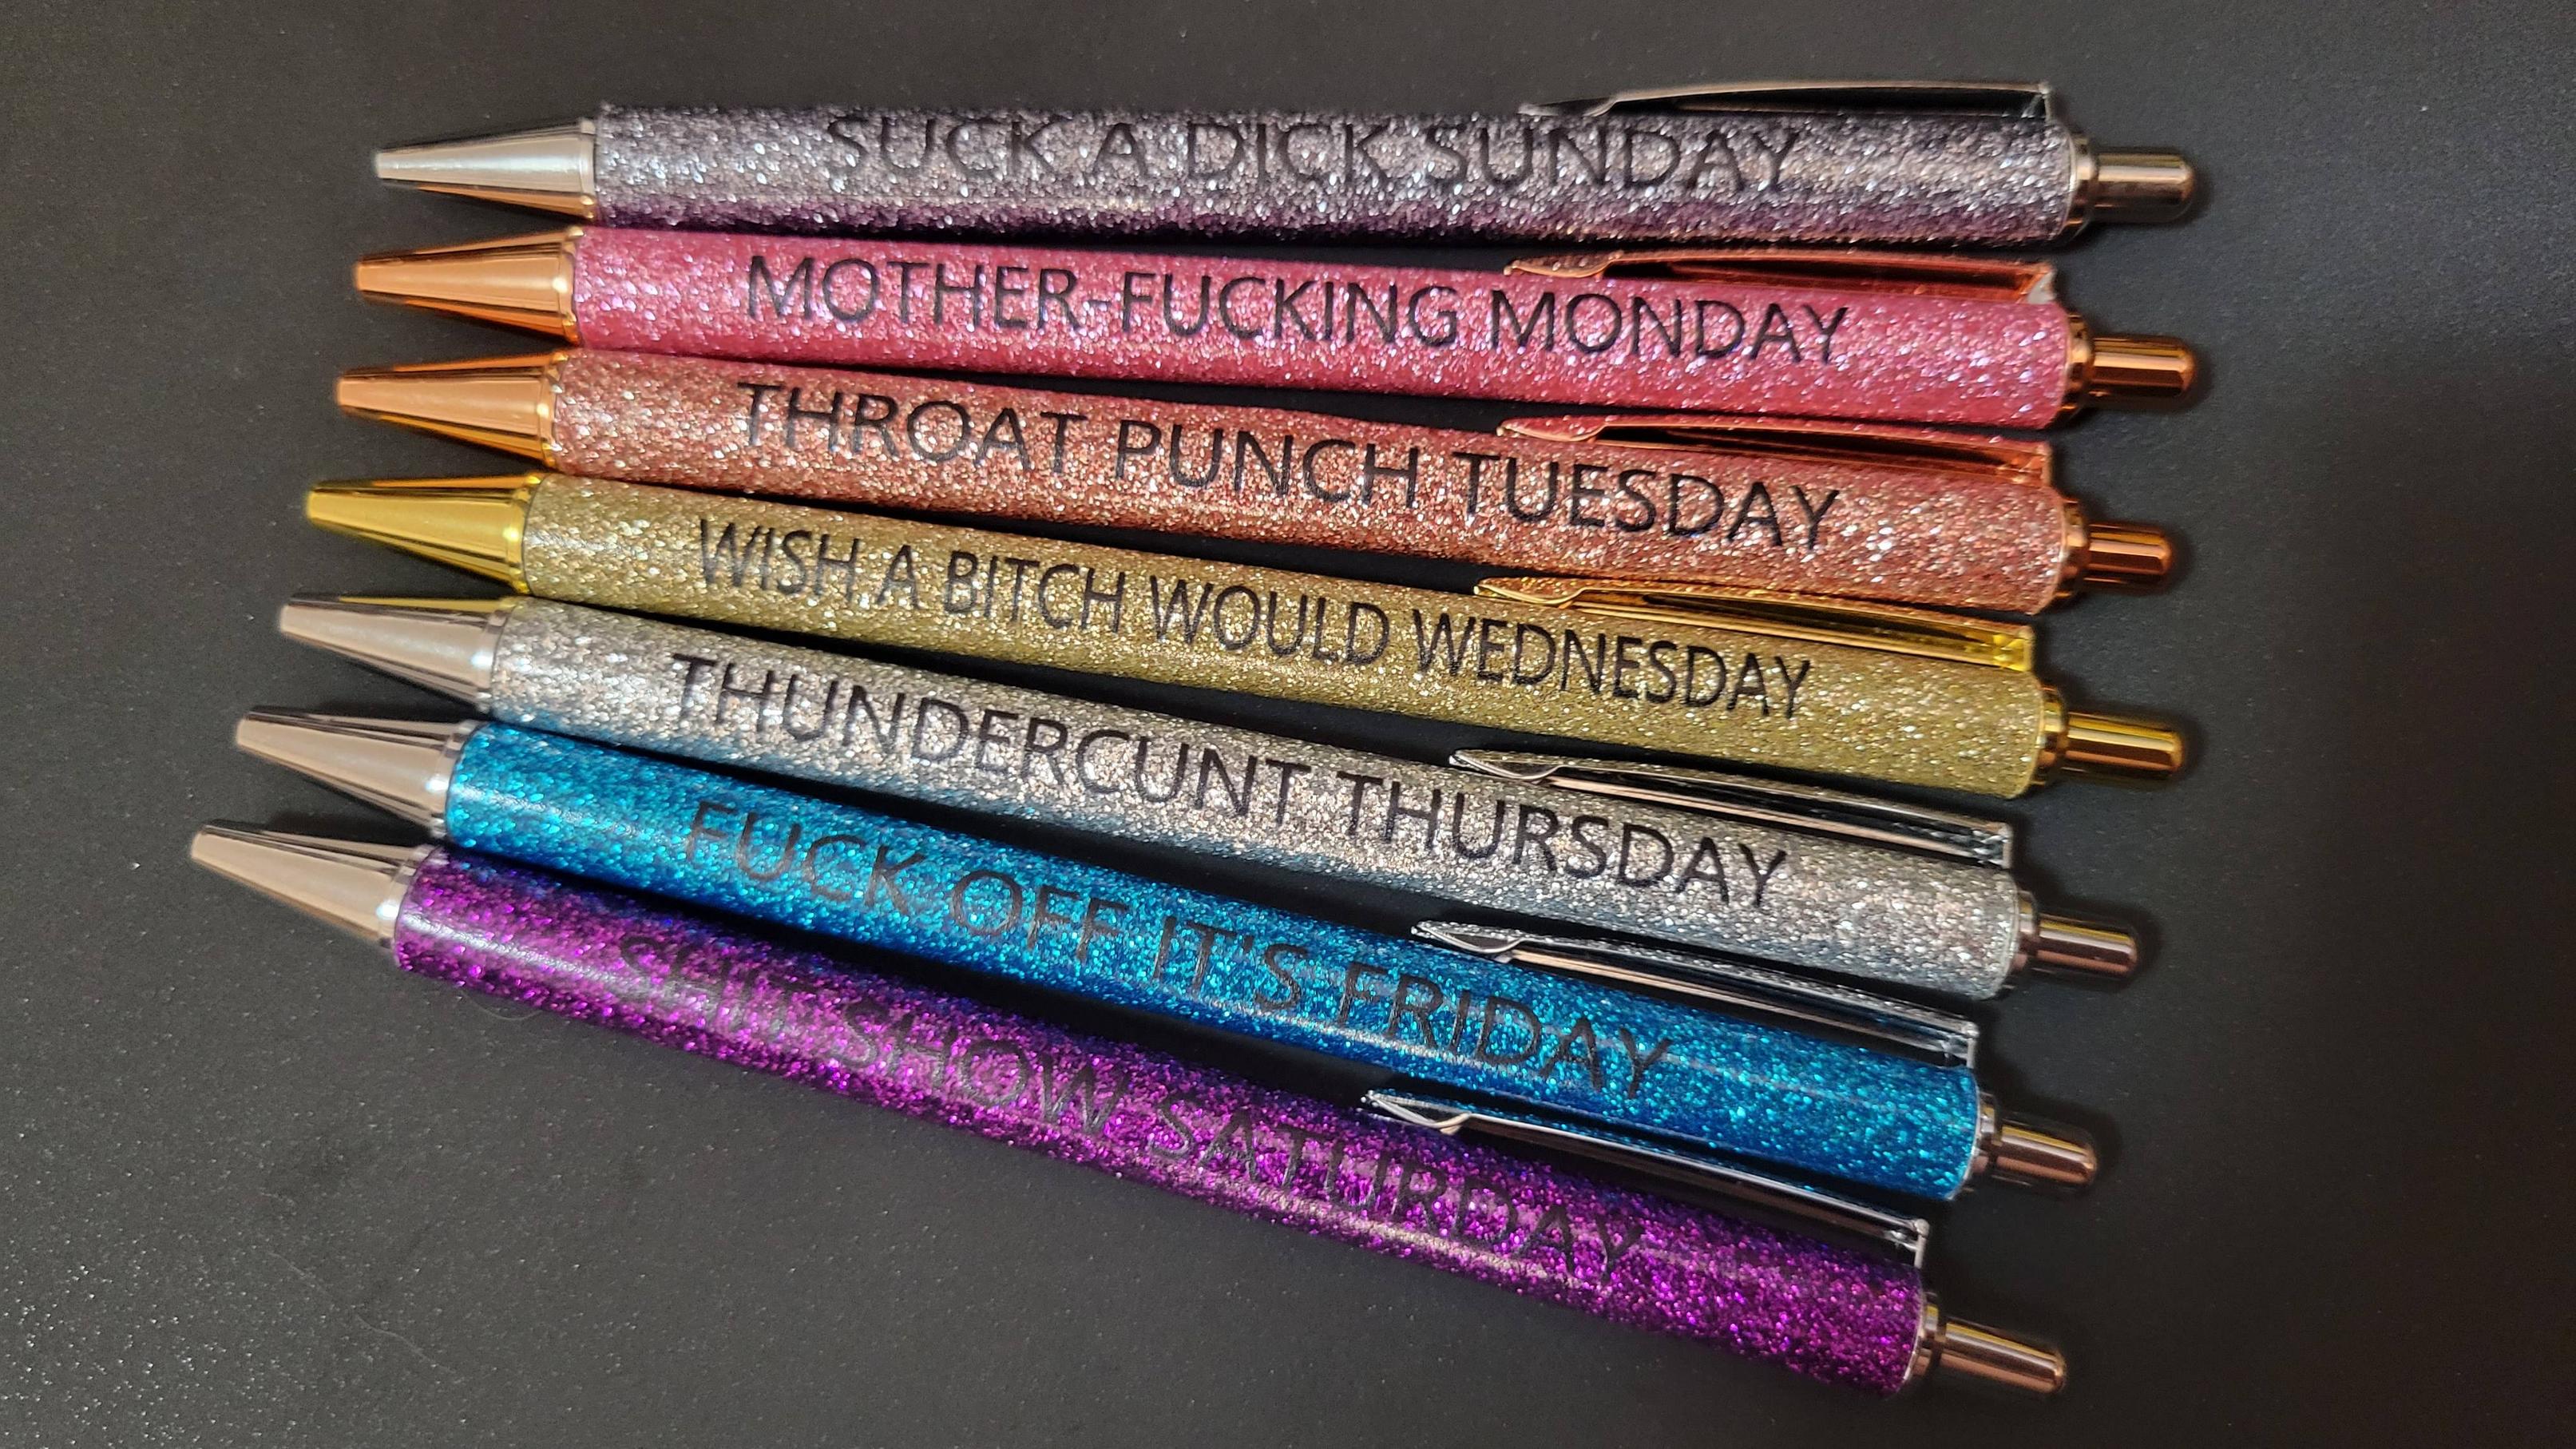 fascinating photos - pencil - Sunday Suc Mother Fucking Monday Throat Punch Tuesday Wish A Bitch Would Wednesday Thundercunt Thursday Thursday